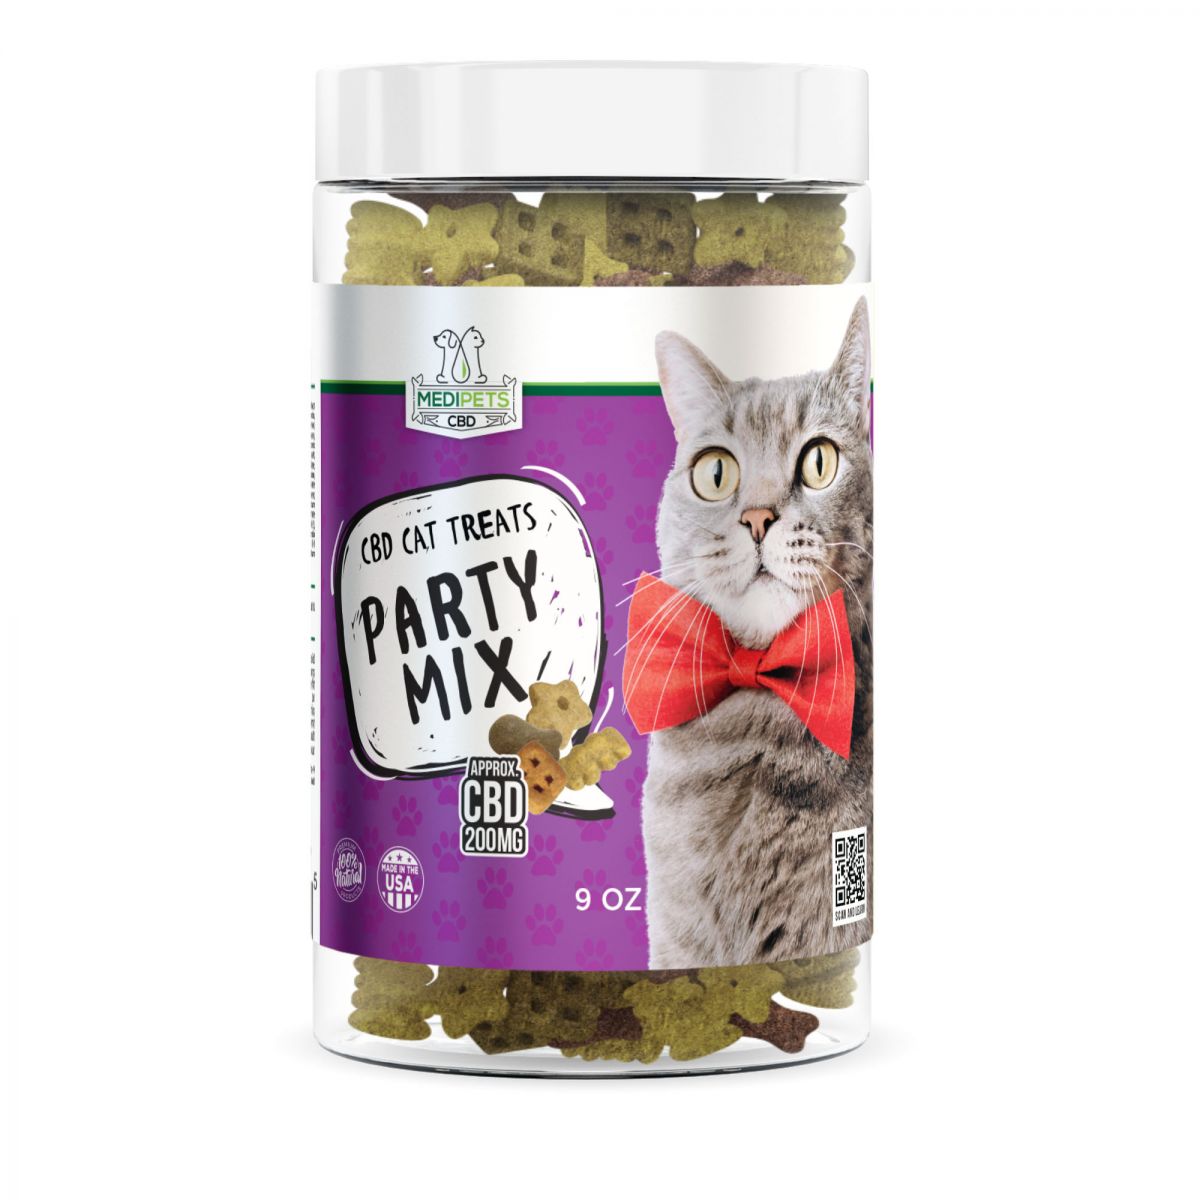 Packed with 200mg of CBD (cannabidiol), our CBD cat treats are a party-in-a-treat infused with industrial CBD hemp oil and made in the USA. MediPets CBD Cat Treats Party Mix are a great way to treat your kitty to a feline snack filled with all-natural CBD, one that your cat will love.